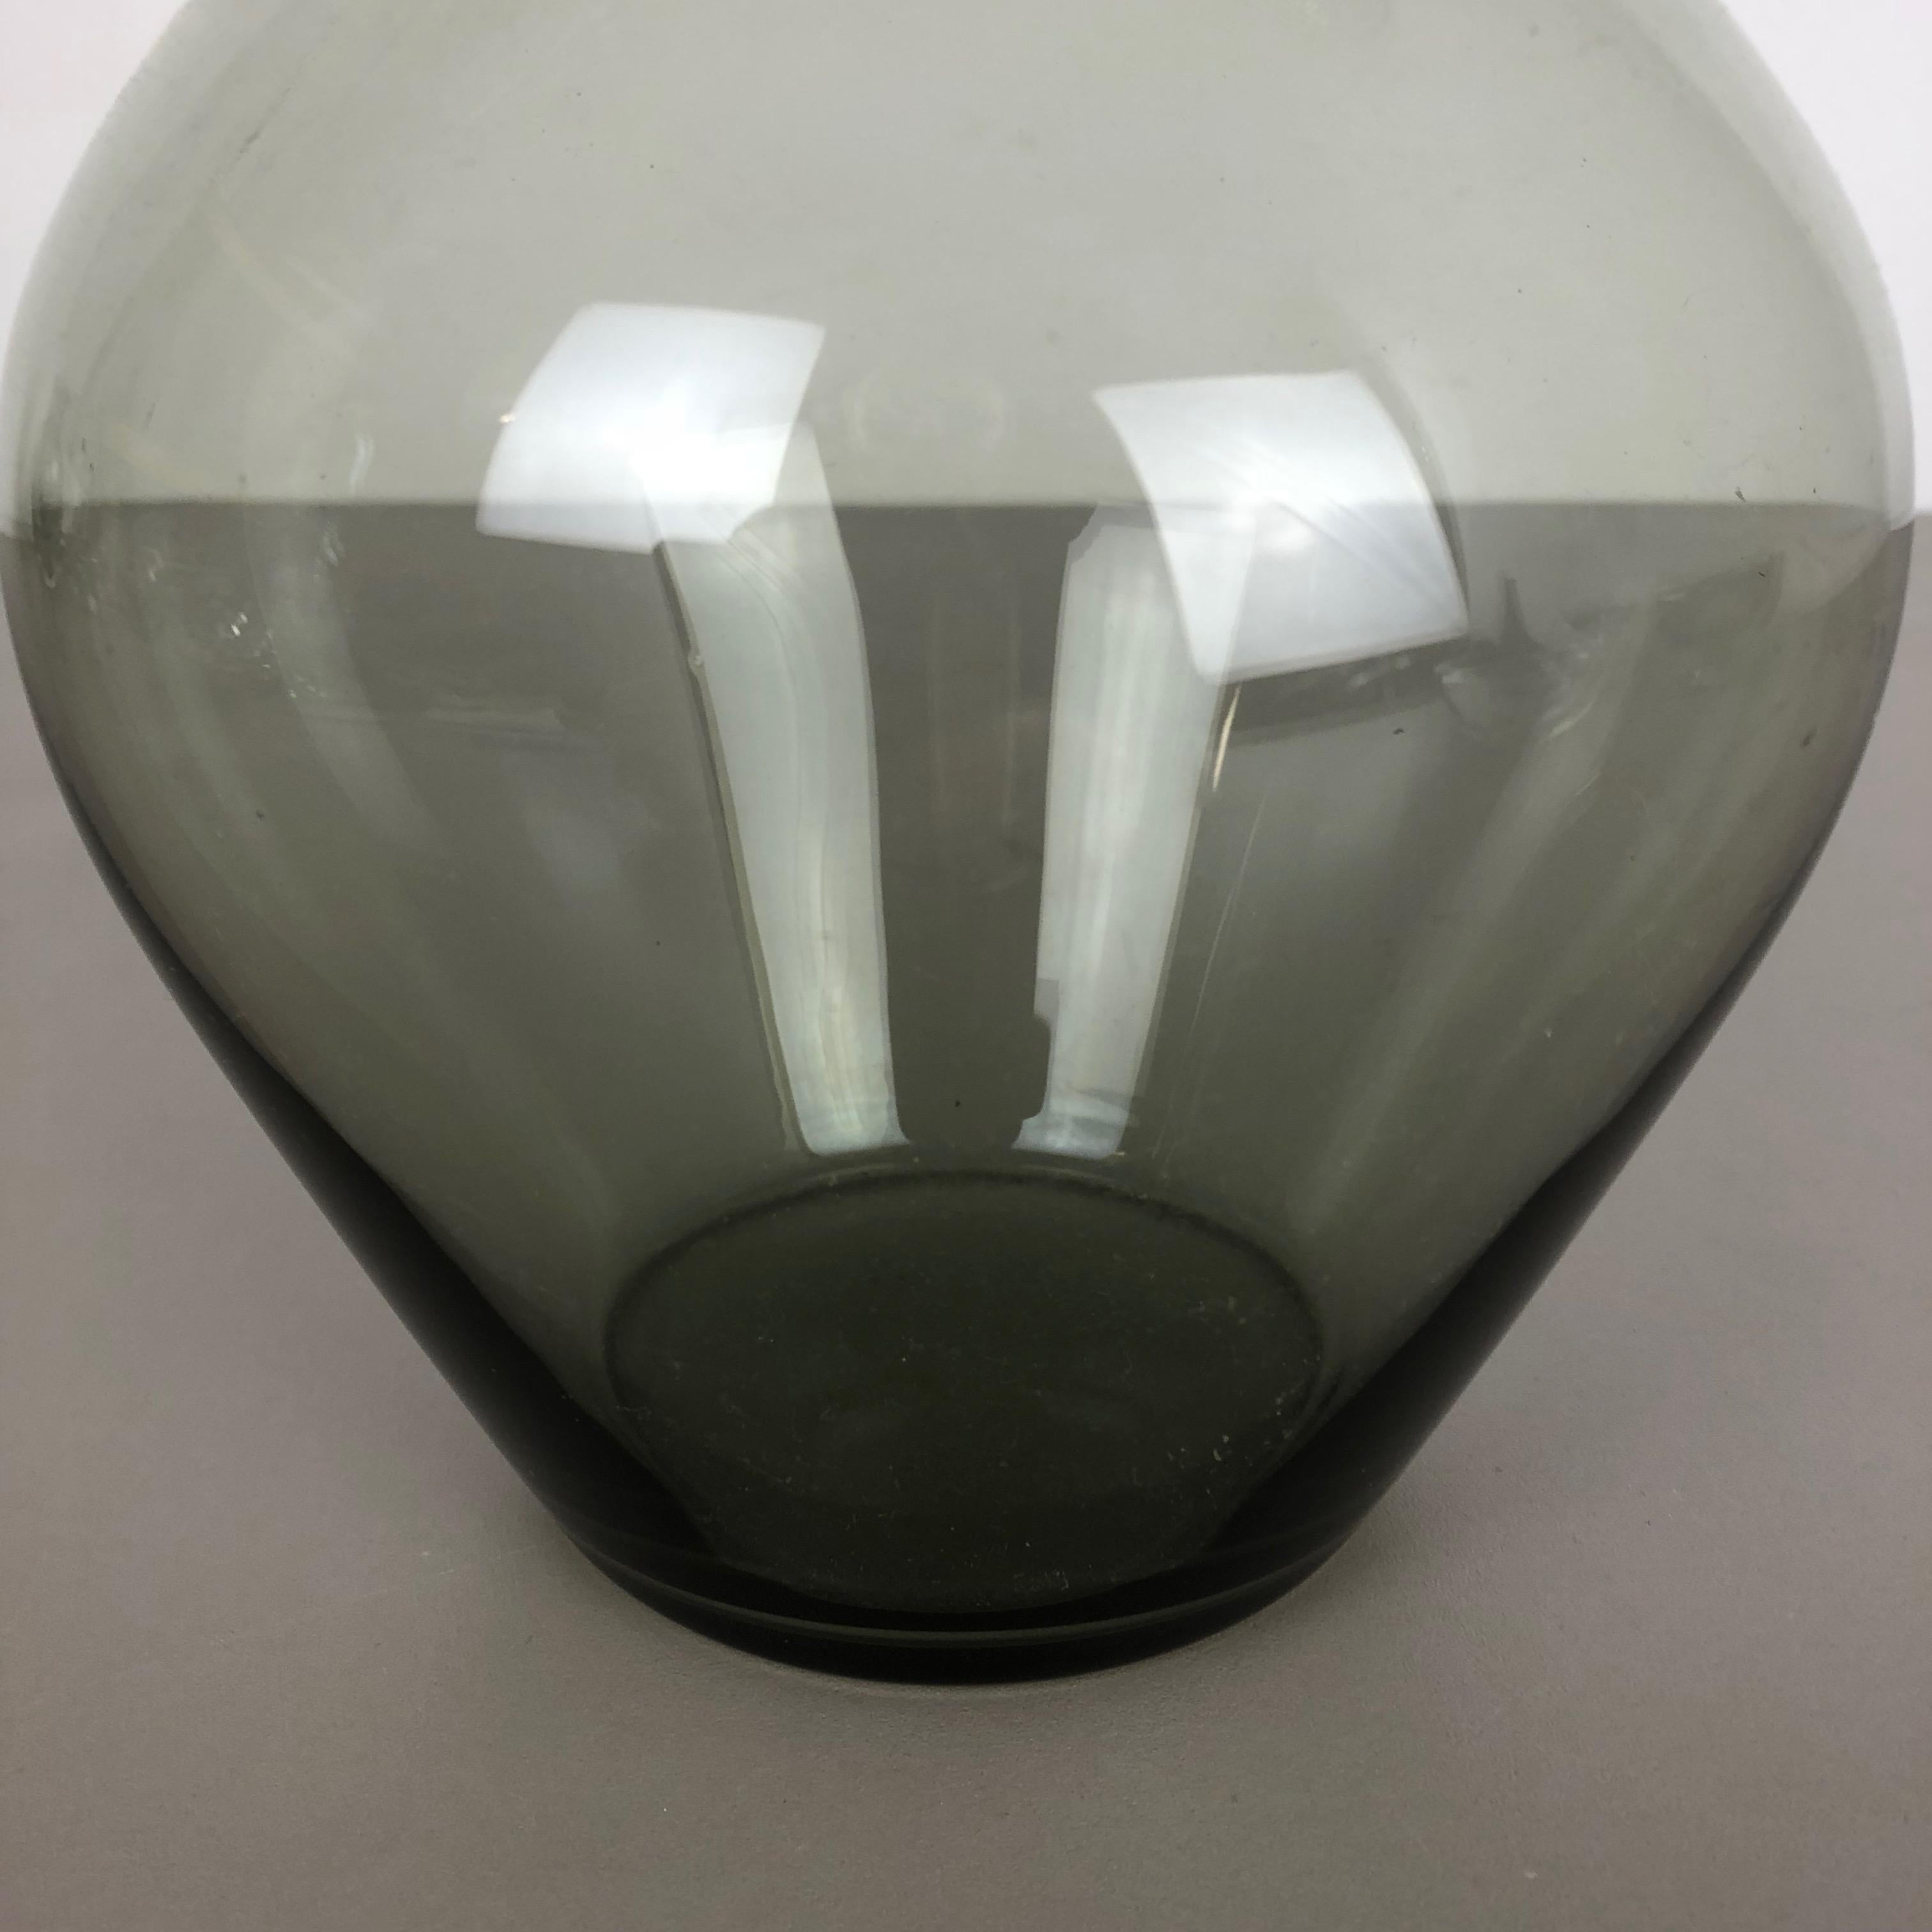 Vintage 1960s Turmalin Vase by Wilhelm Wagenfeld for WMF, Germany Bauhaus In Good Condition For Sale In Kirchlengern, DE